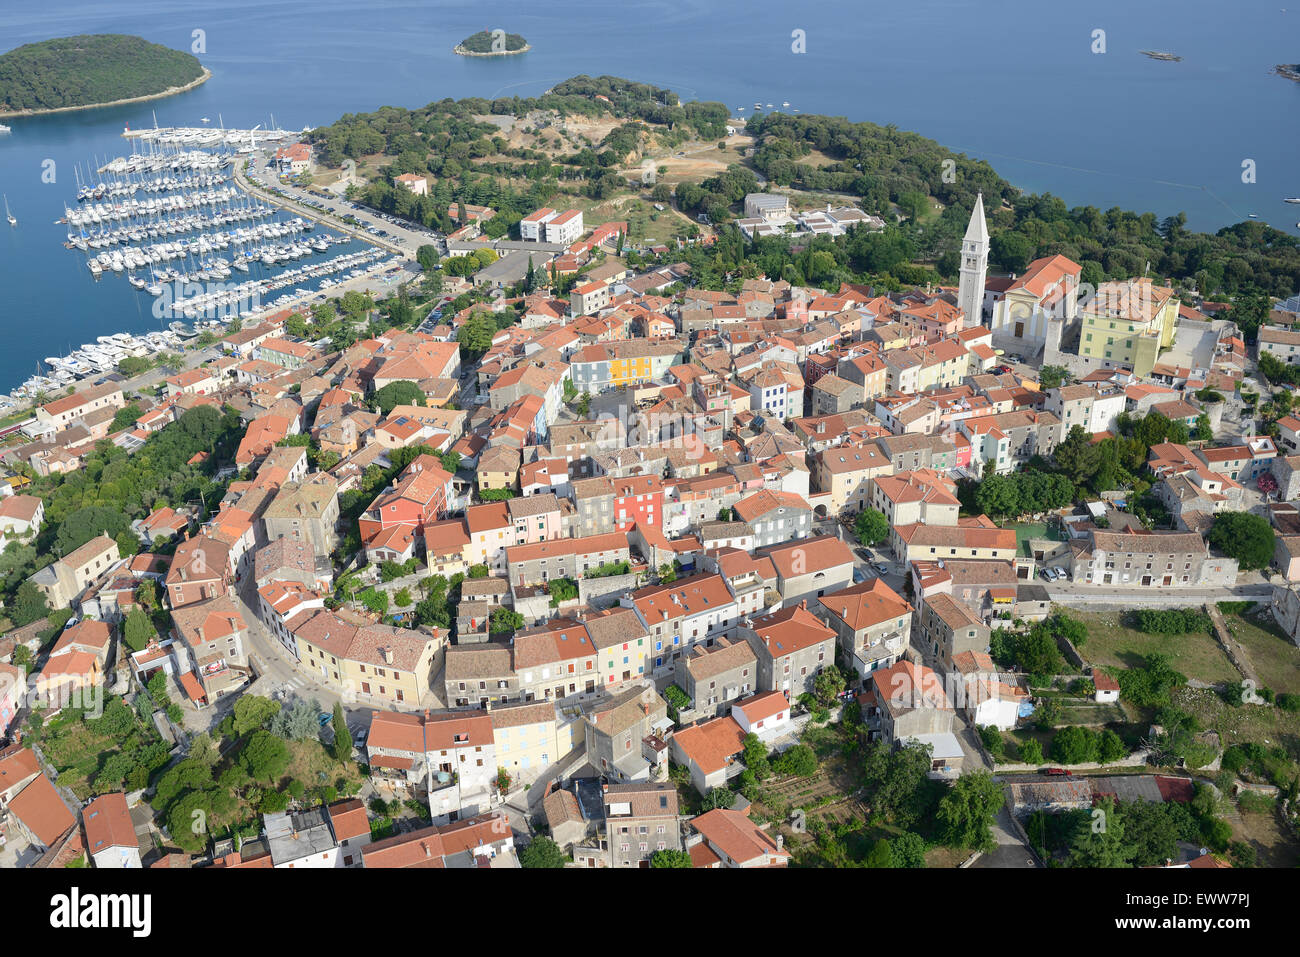 AERIAL VIEW. Medieval hilltop village overlooking the Adriatic coast. Vrsar (also known as Orsera, its Italian name), Istria, Croatia. Stock Photo